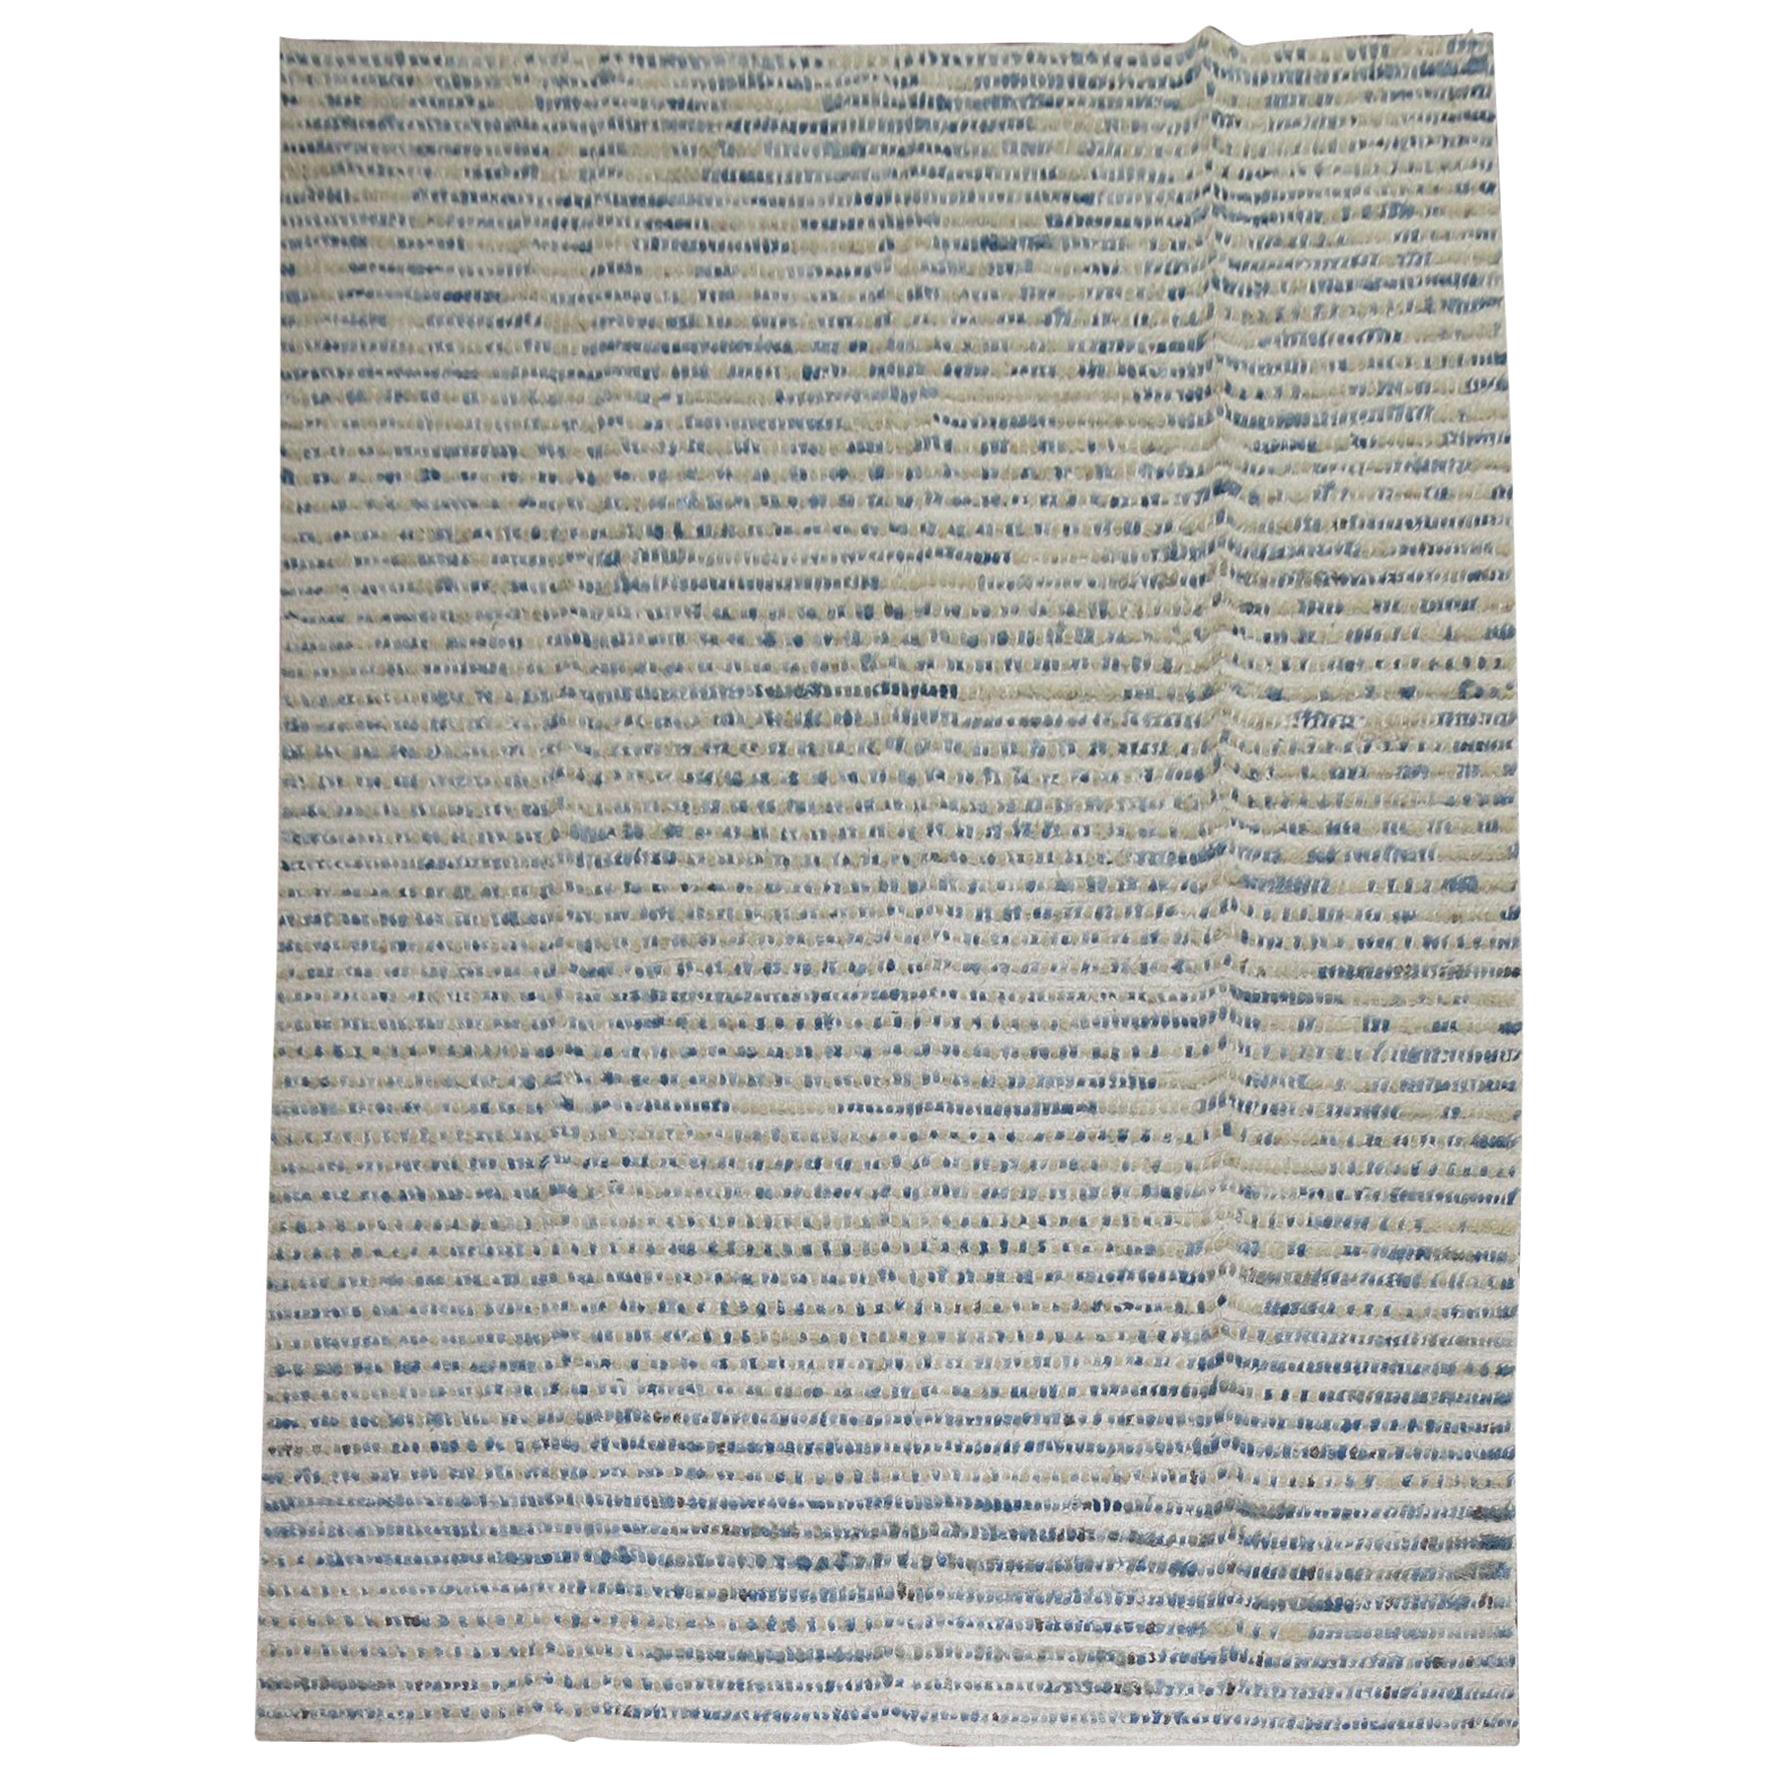 Contemporary White and Blue Turkish Room Size Wool Rug